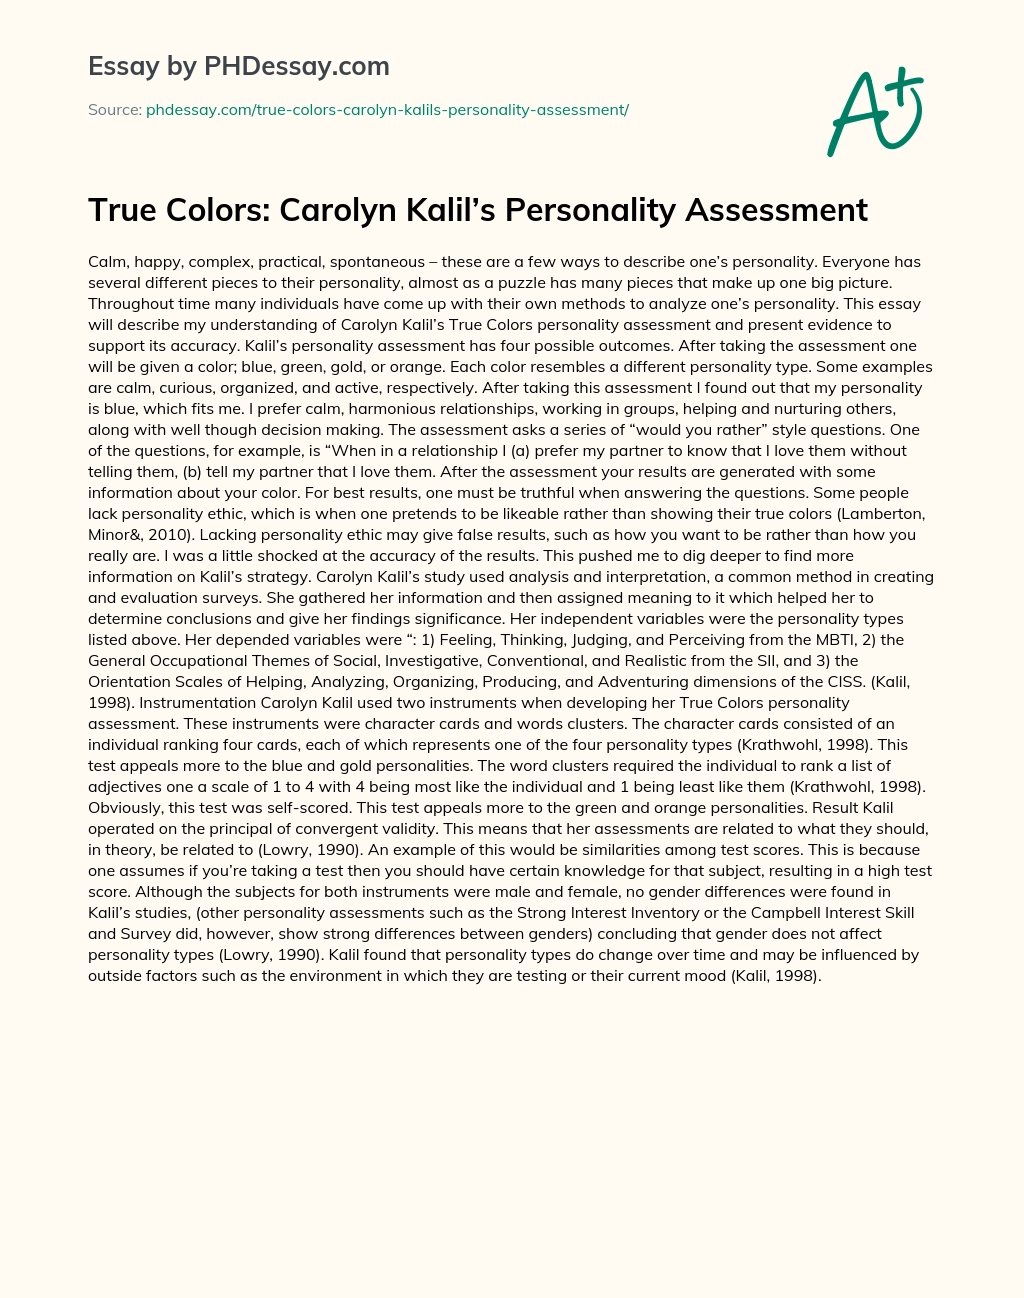 True Colors: Carolyn Kalil’s Personality Assessment essay